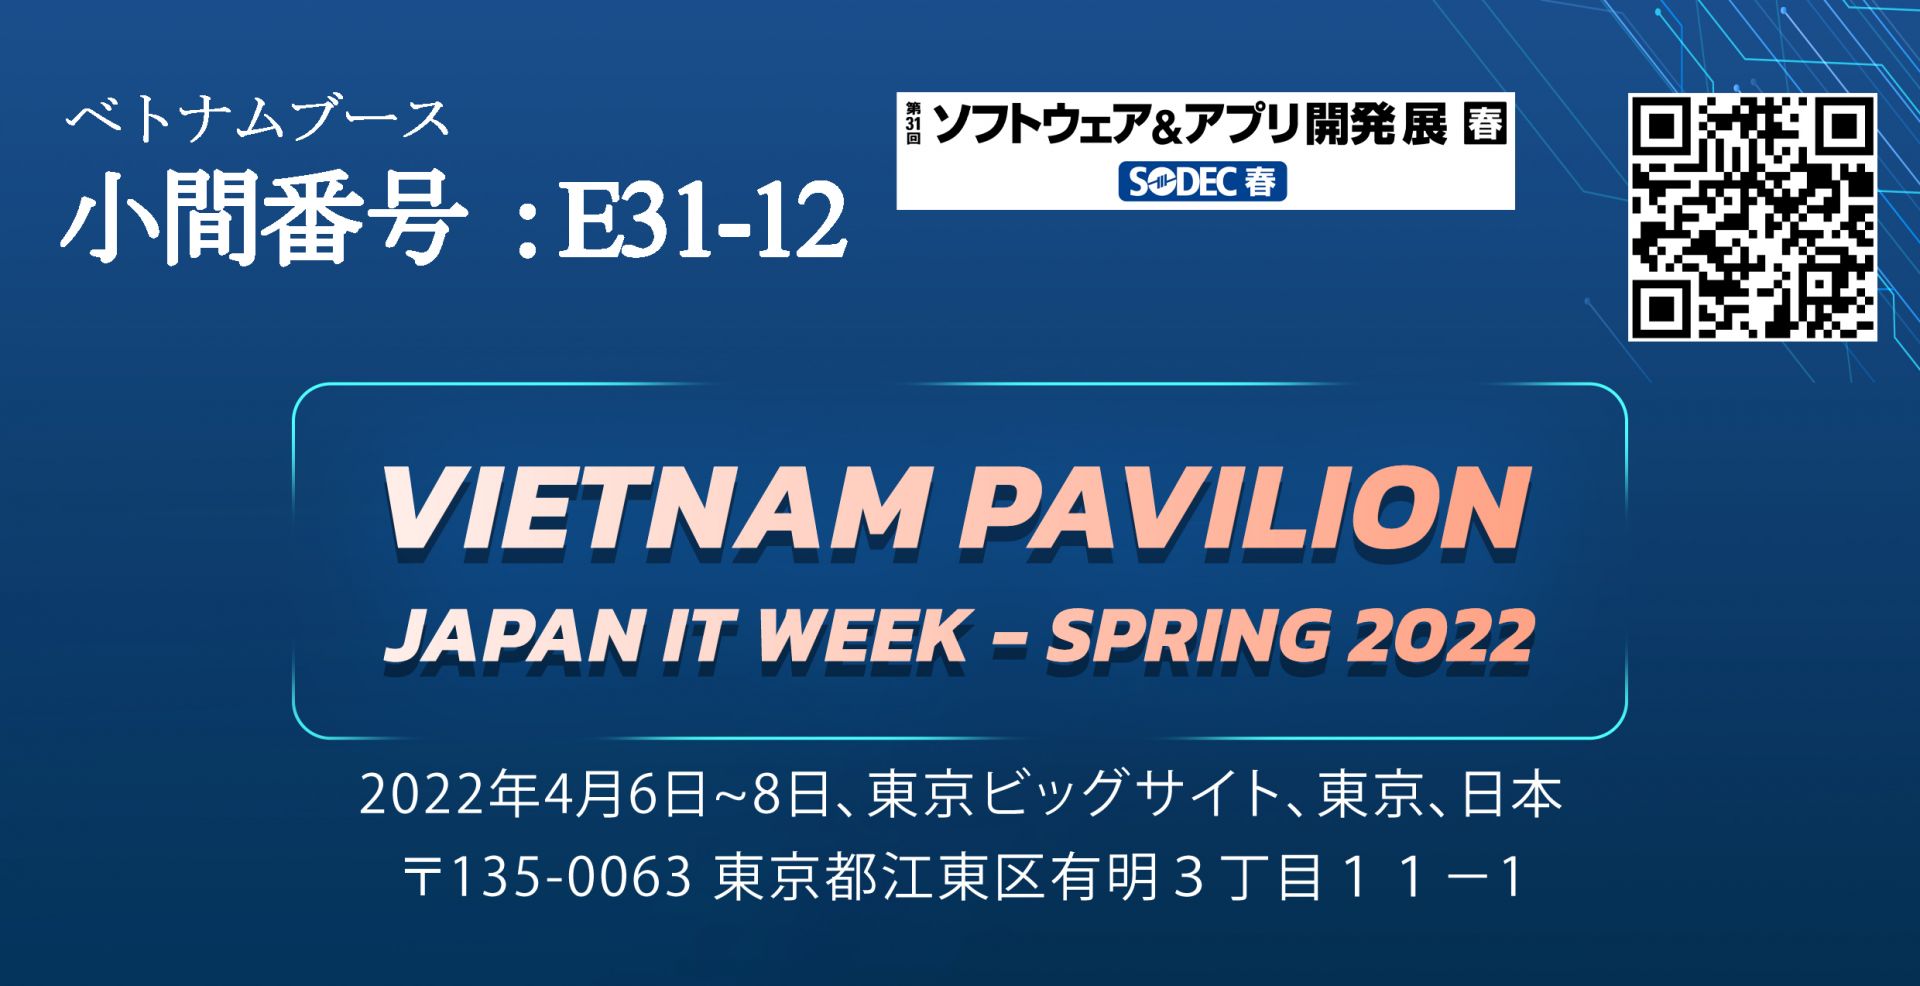 Japan IT Week - Spring 2022 - Software Application Expo